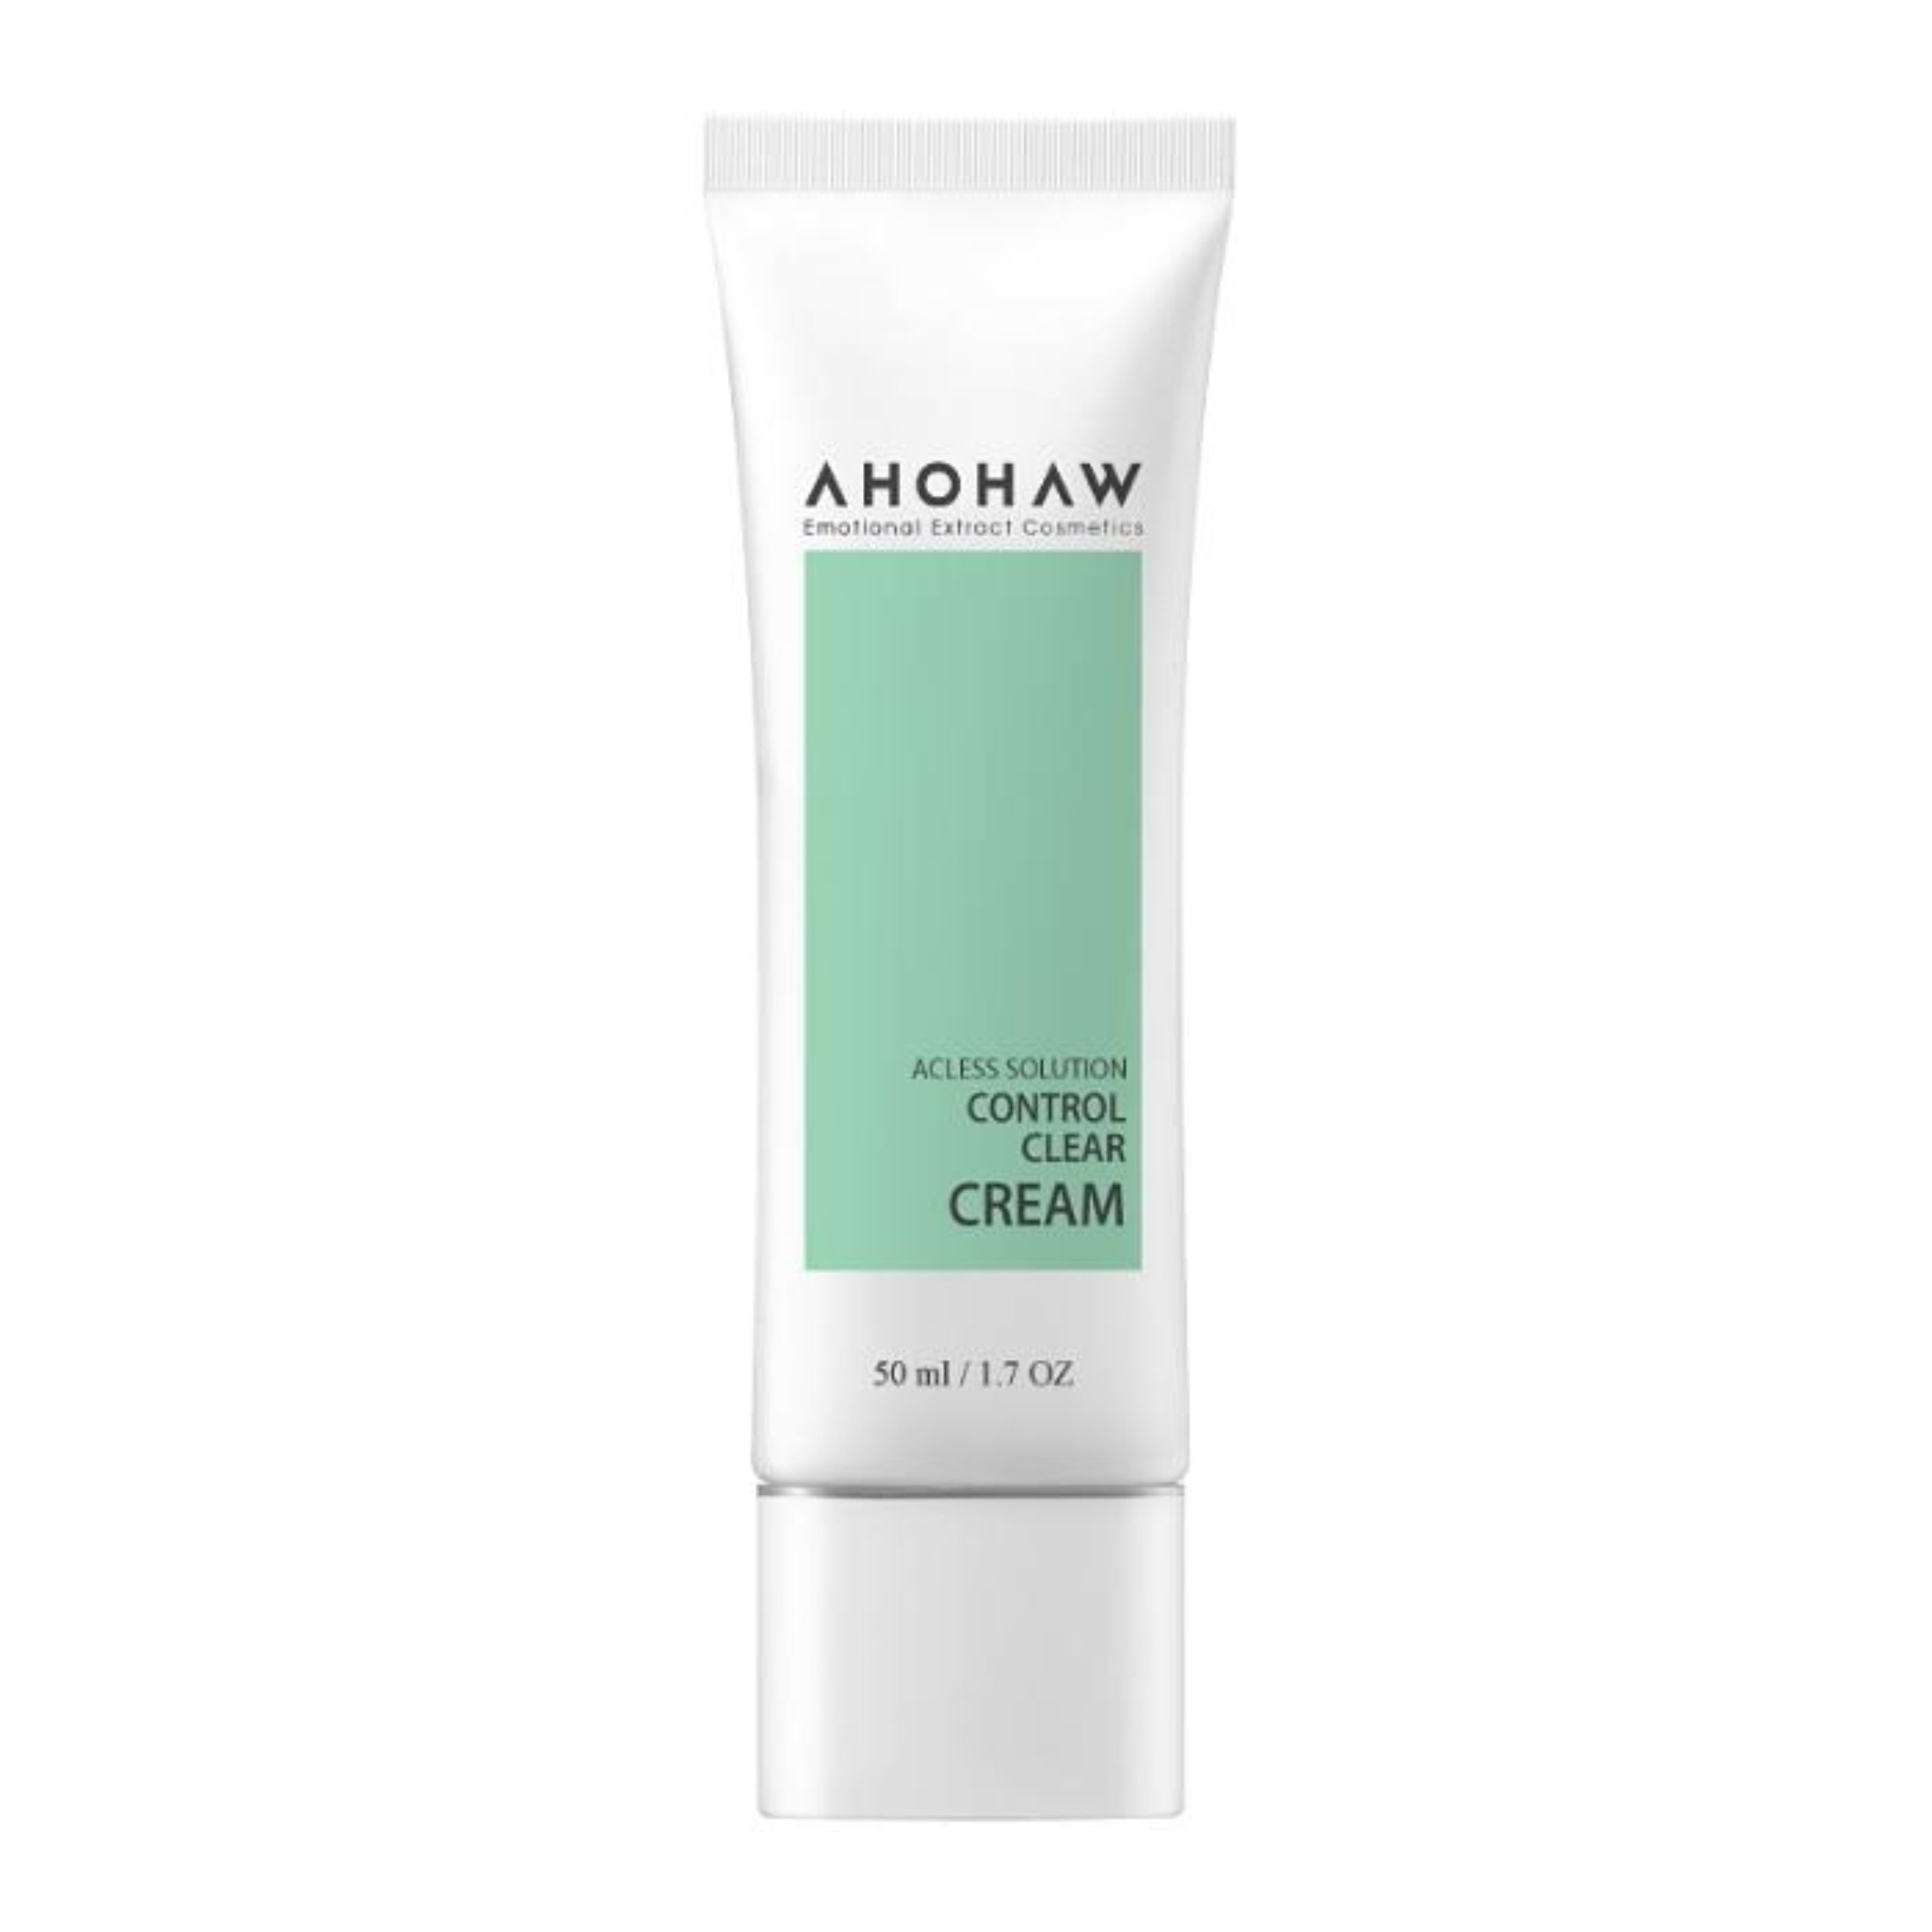 Clear control. Control clearing Cream. AHOHAW.